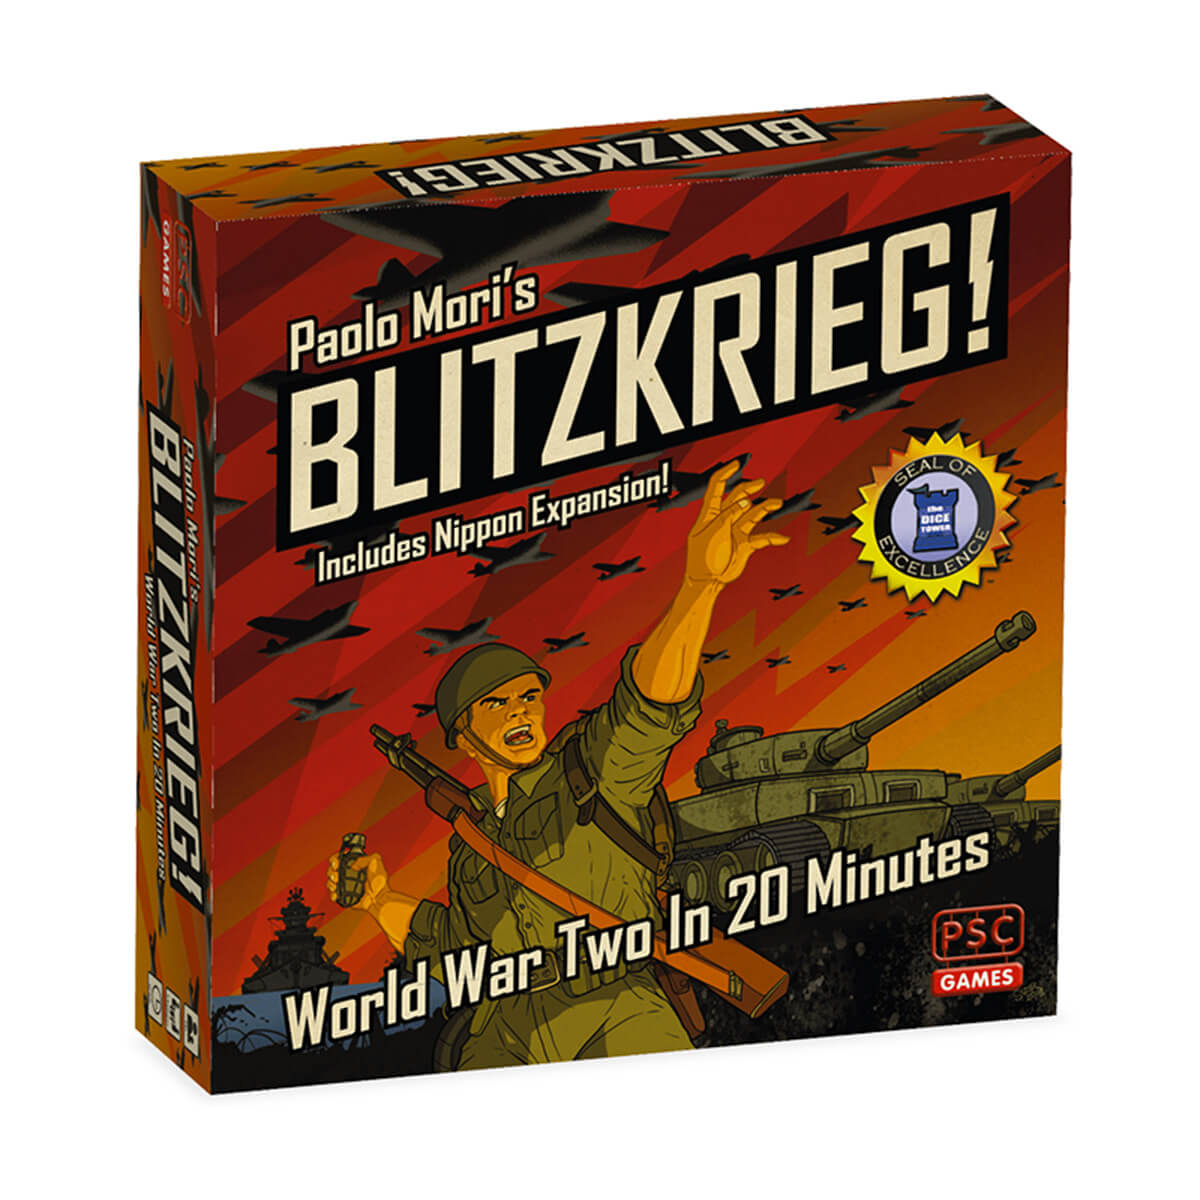 Blitzkrieg!: World War Two in 20 Minutes.